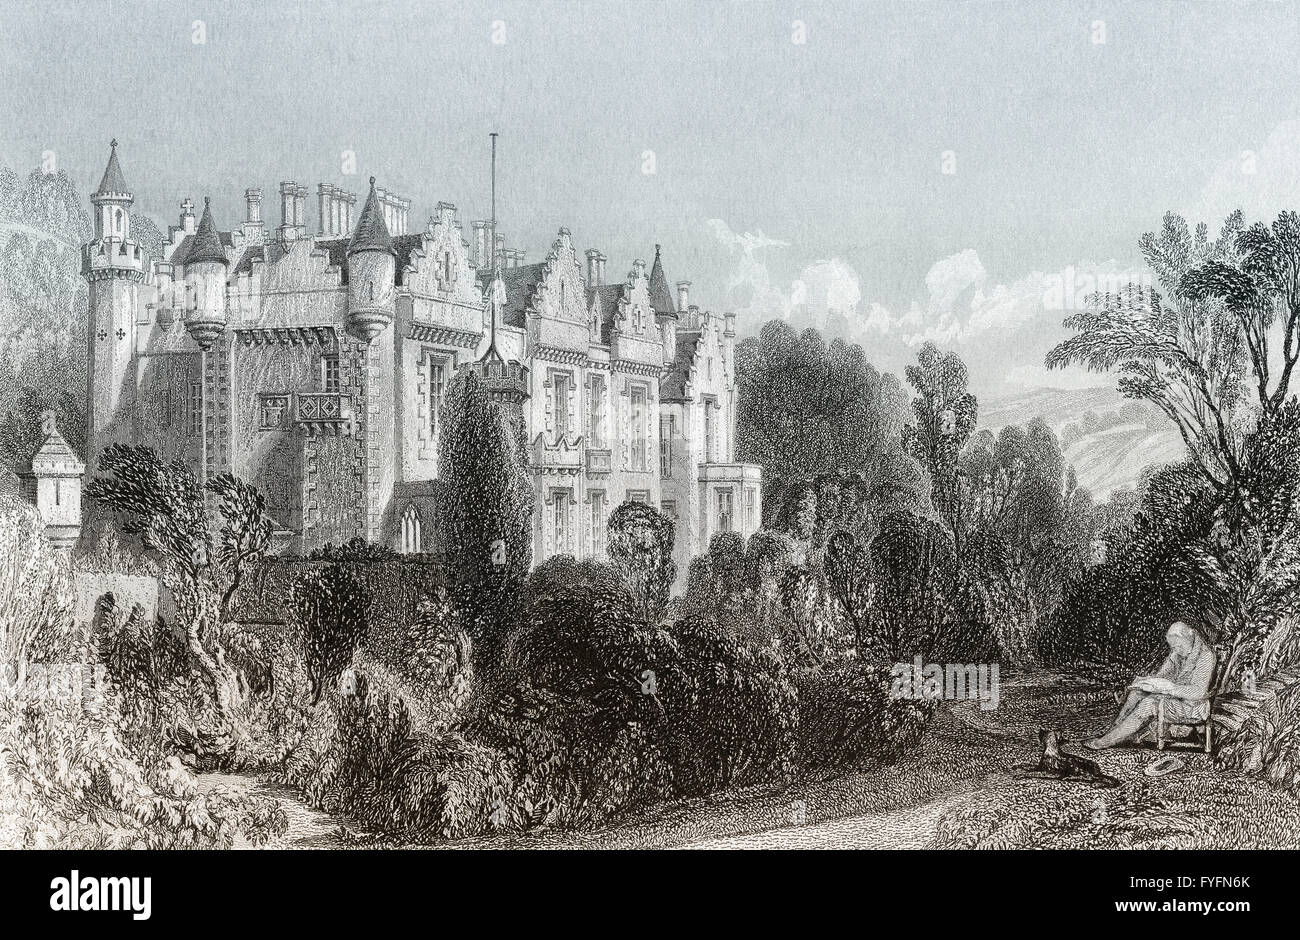 Abbotsford House near Melrose, South- Scotland, Sir Walter Scott, 1st Baronet of Abbotsford, 1771 - 1832, a Scottish poet and wr Stock Photo